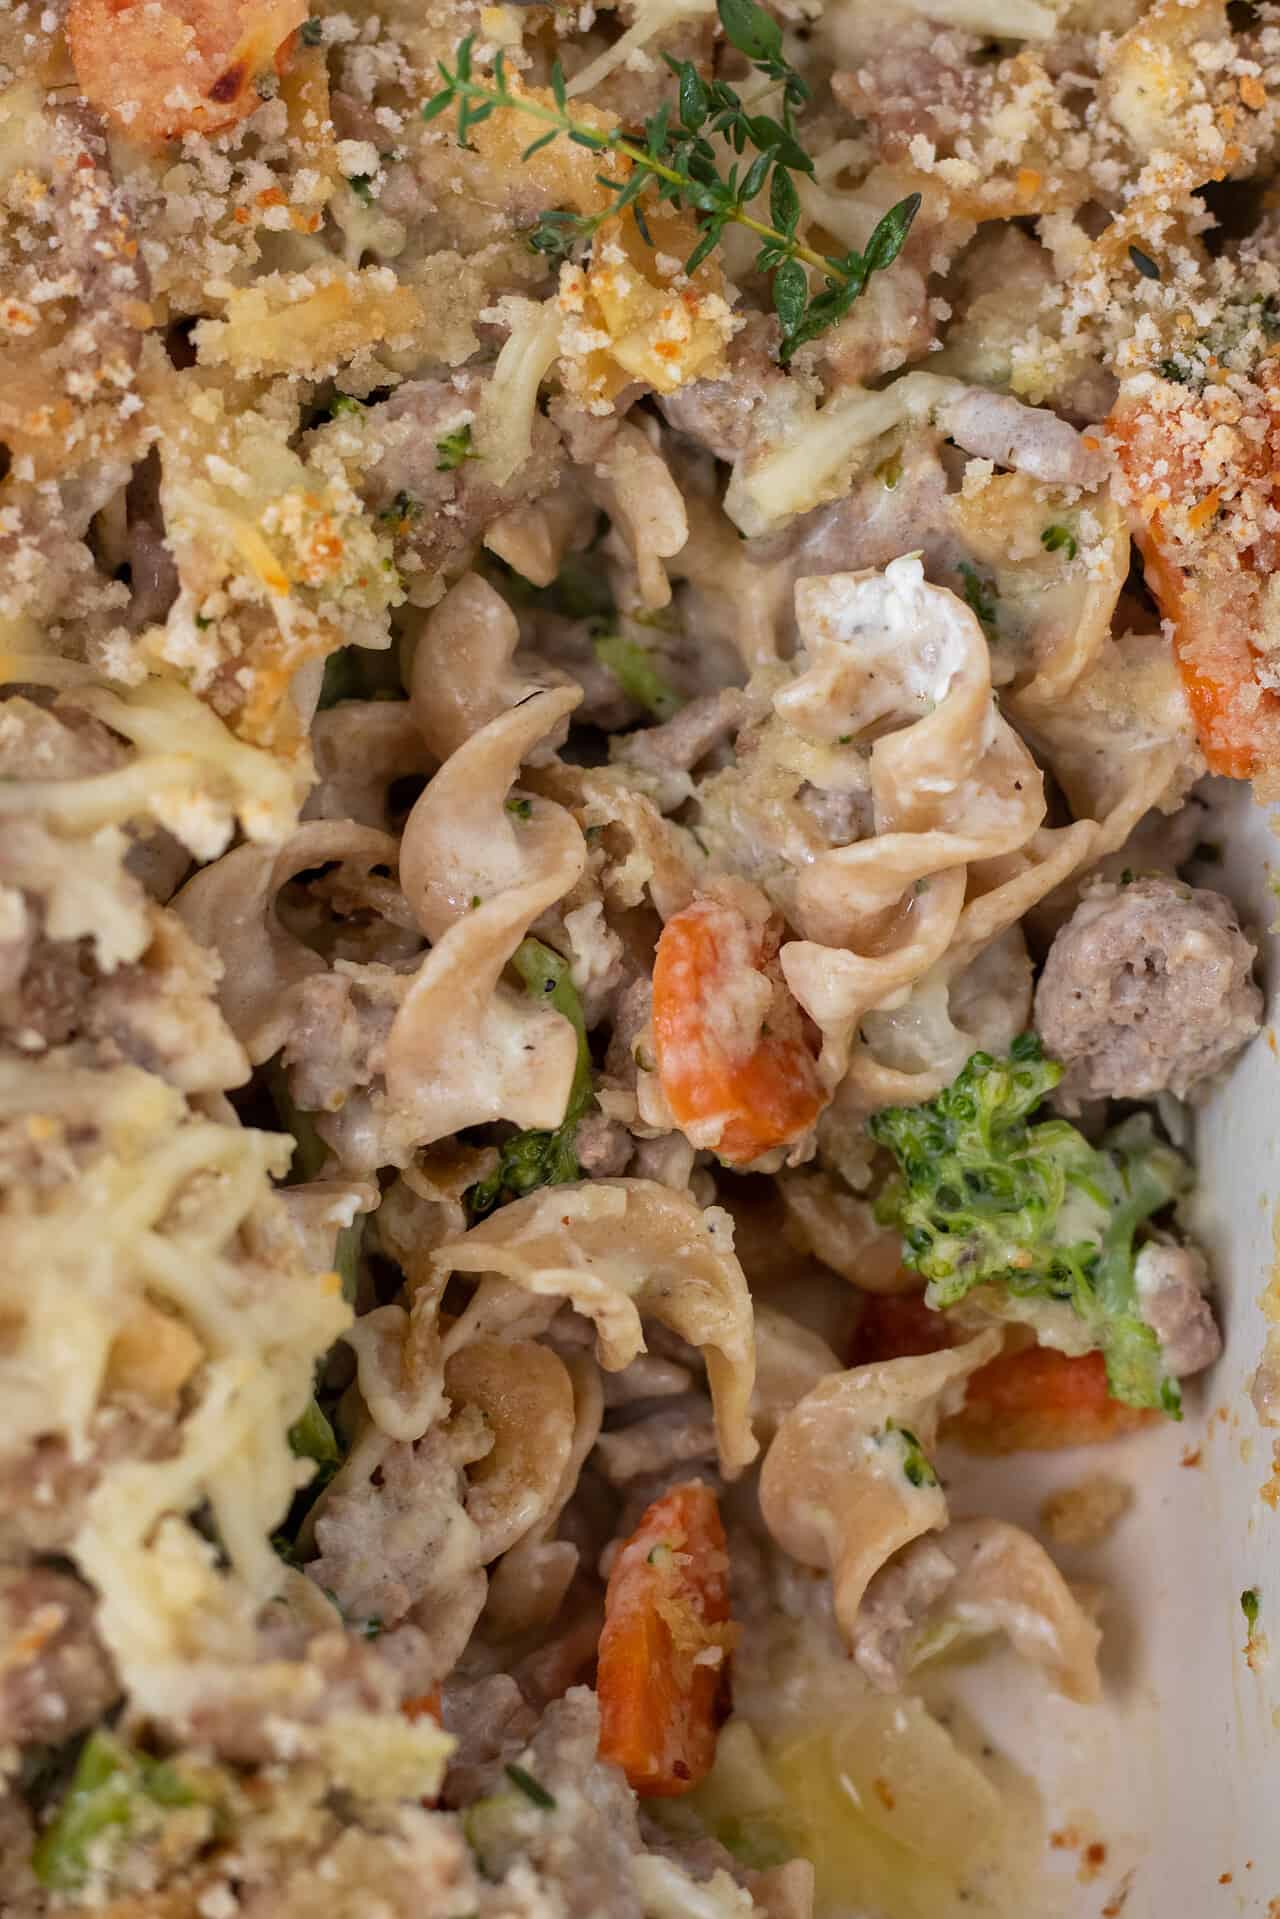 A close up of turkey and broccoli casserole. You can see the creamy noodles with carrots and panko topping